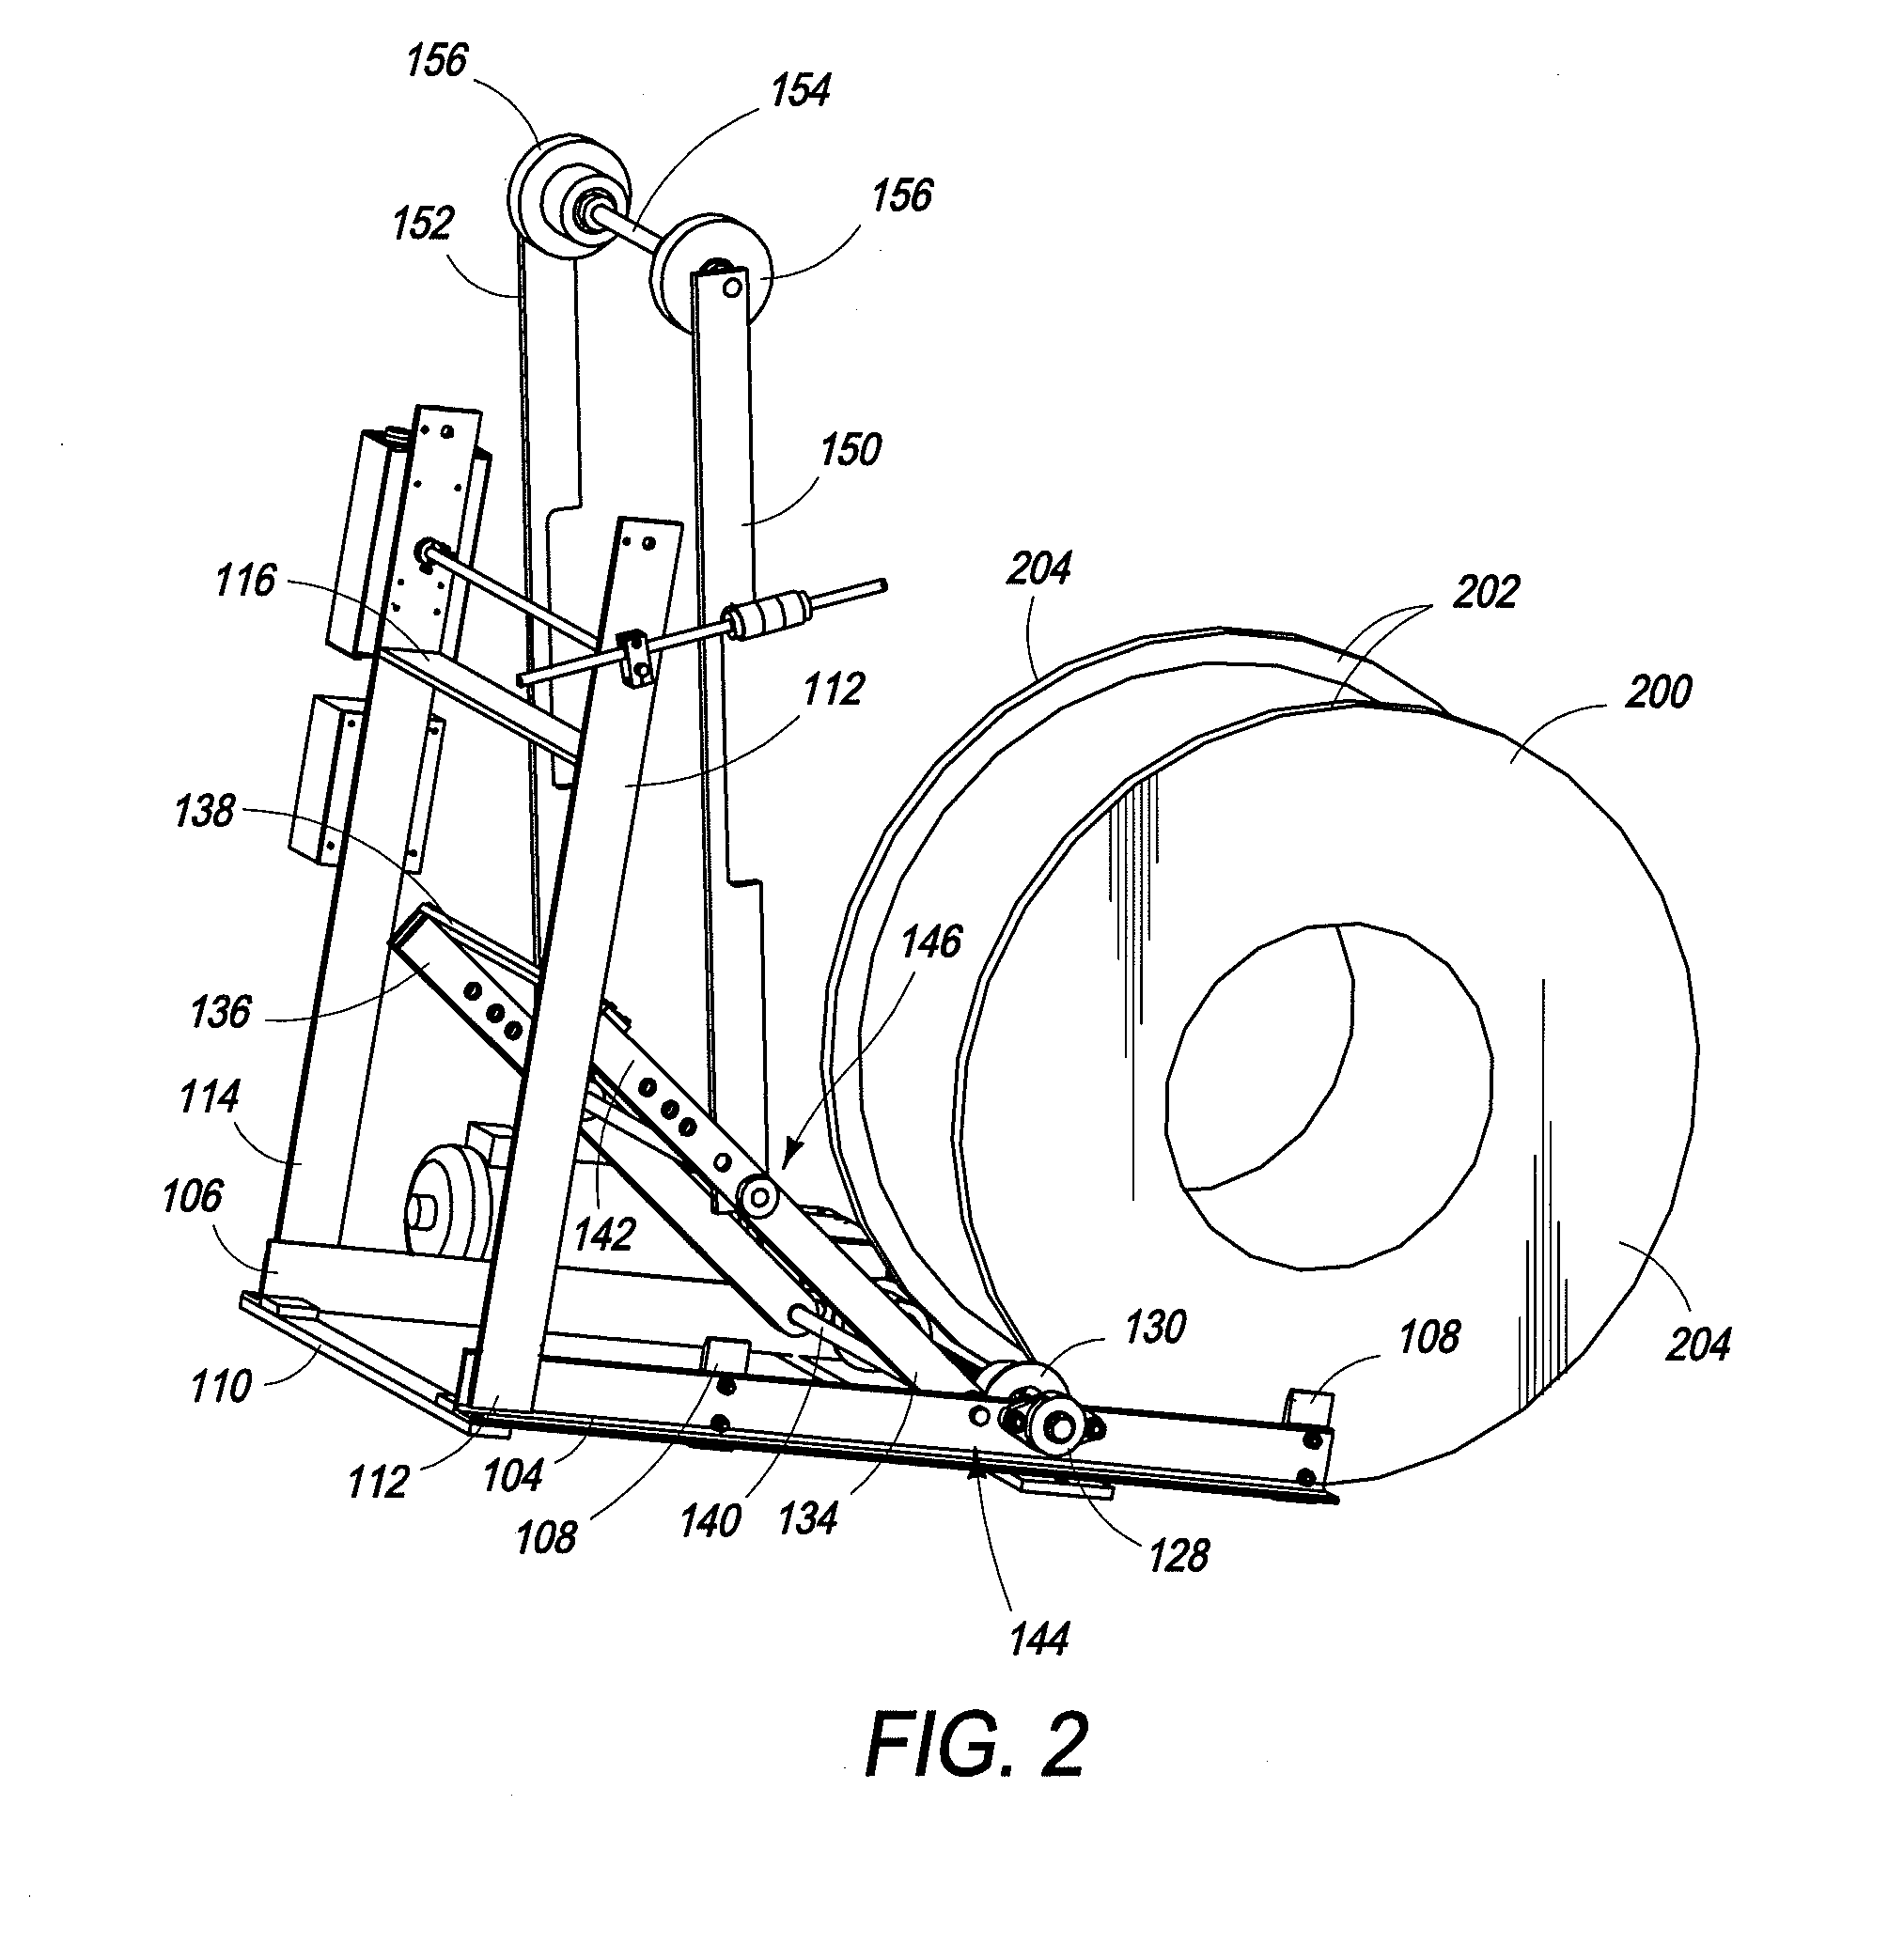 Foot Operated Lever-Lift Vertical Reel Unroller Assembly